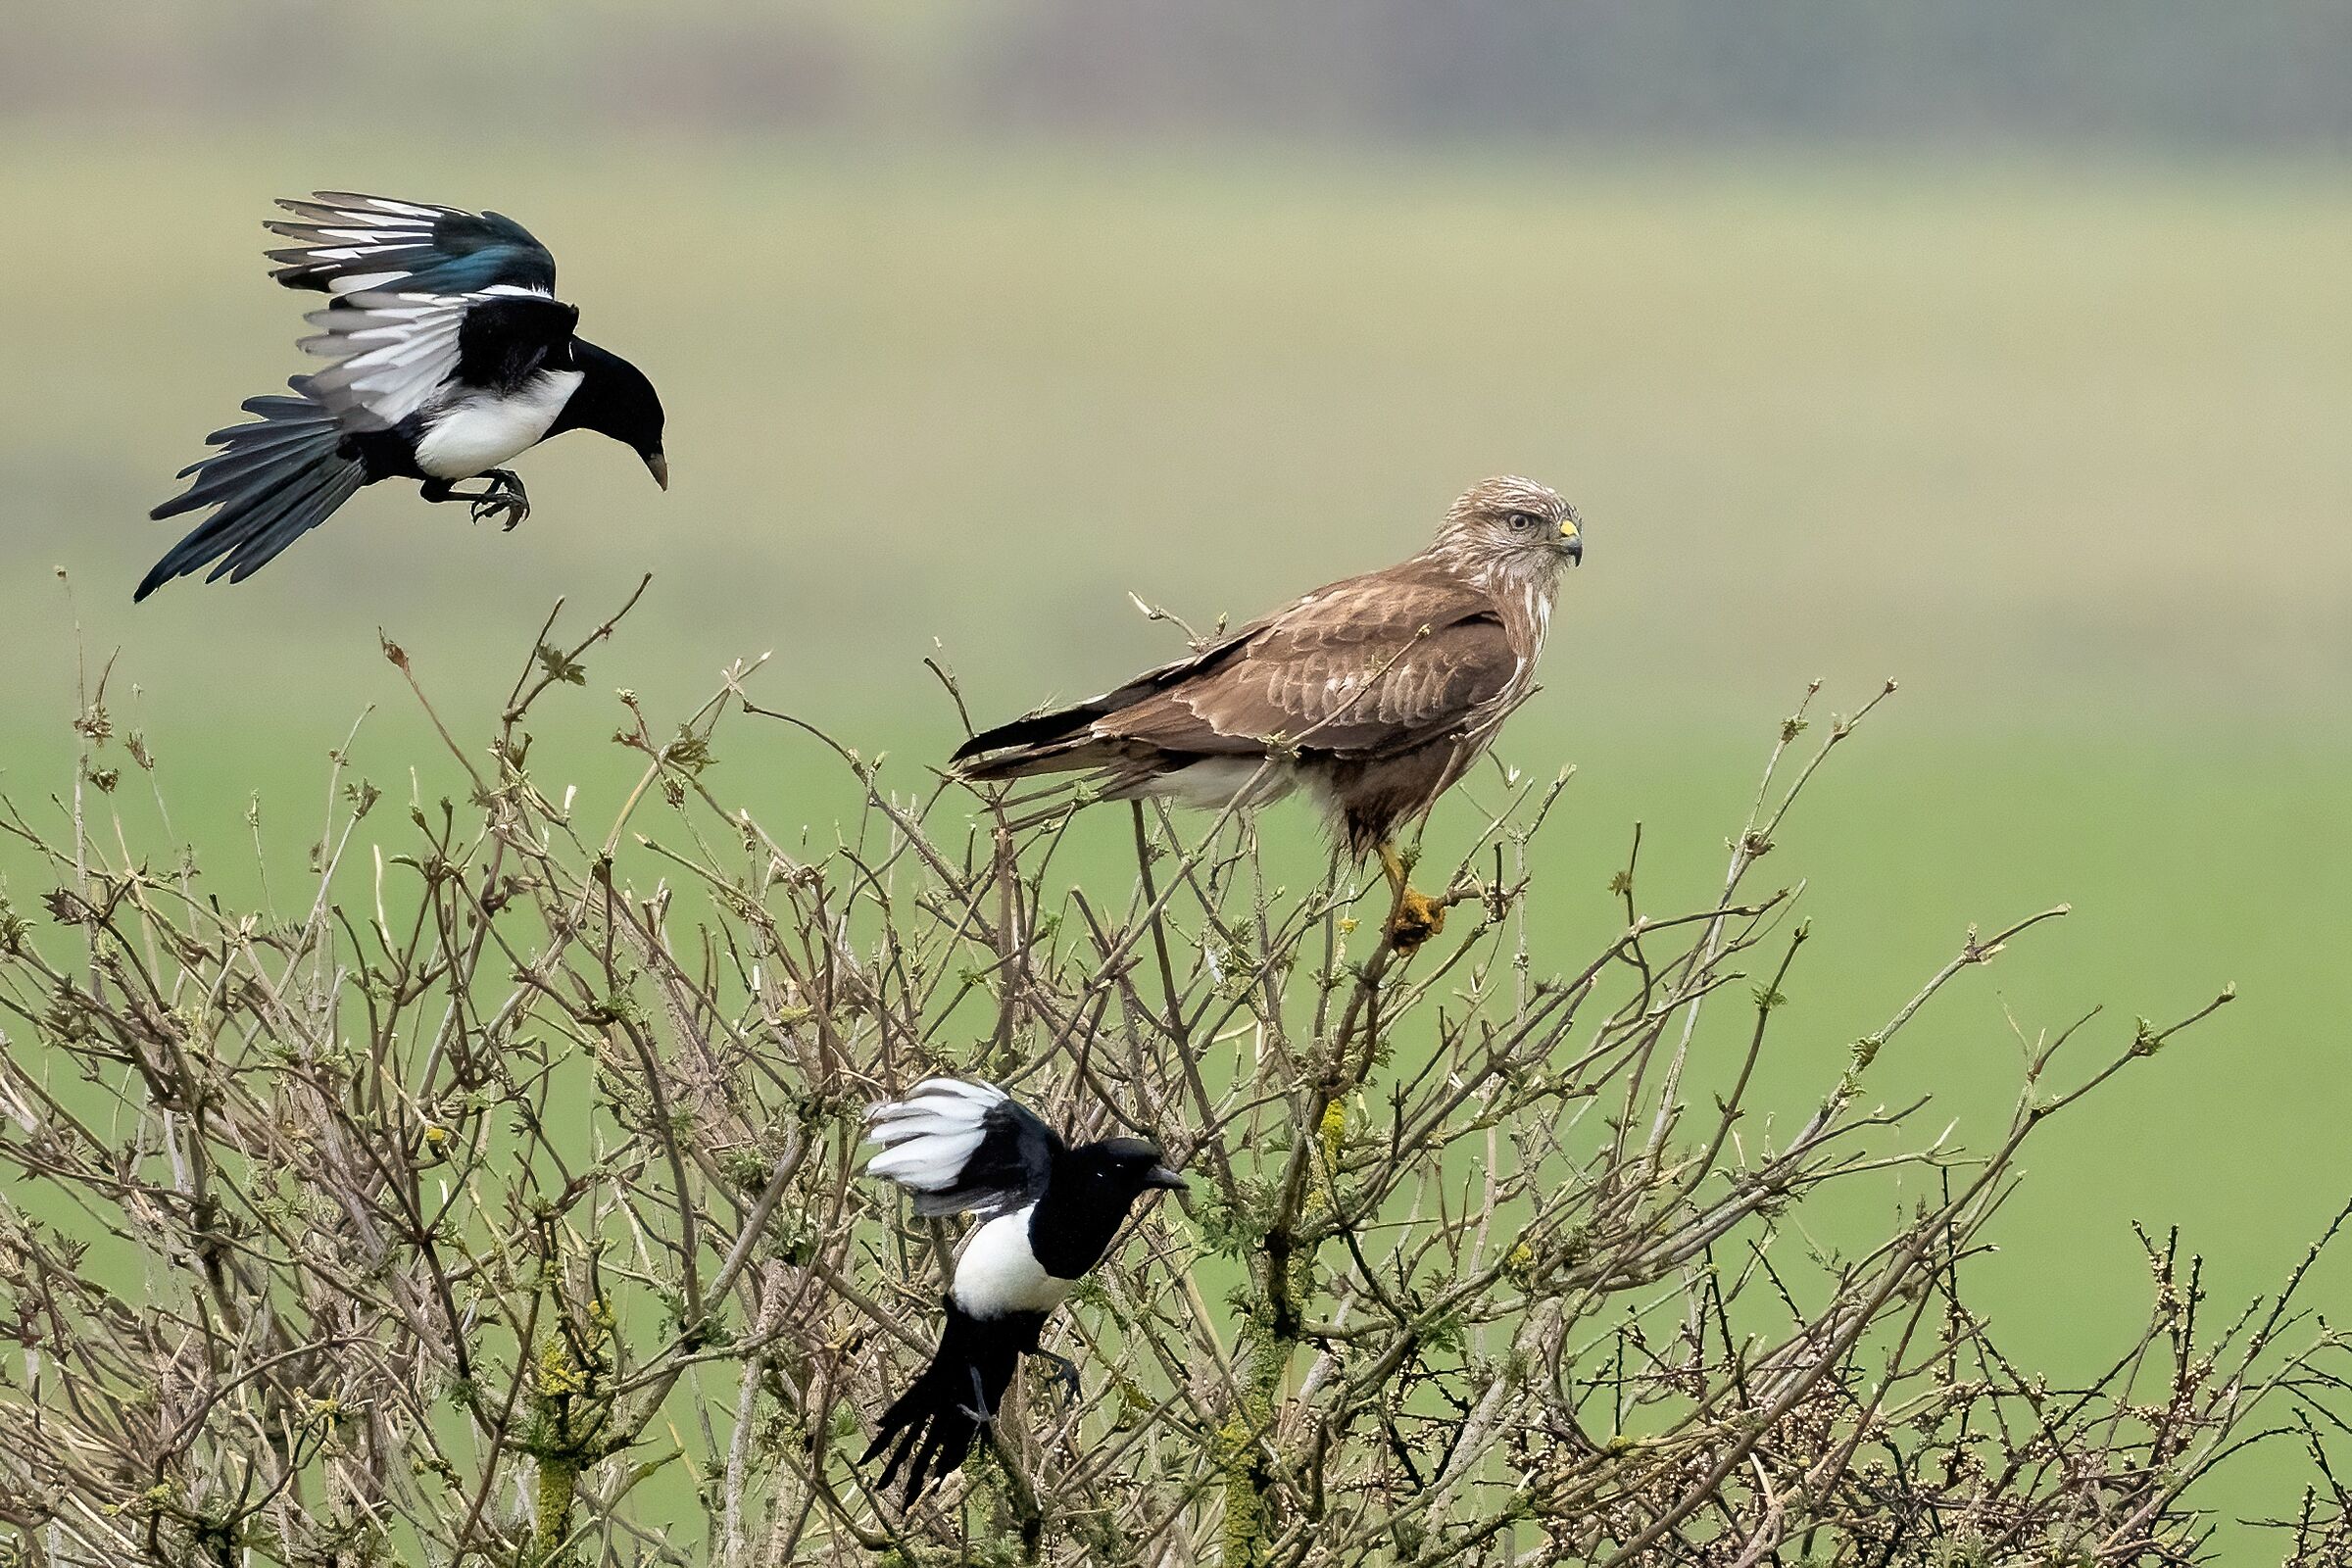 Buzzard annoyed by Magpies...